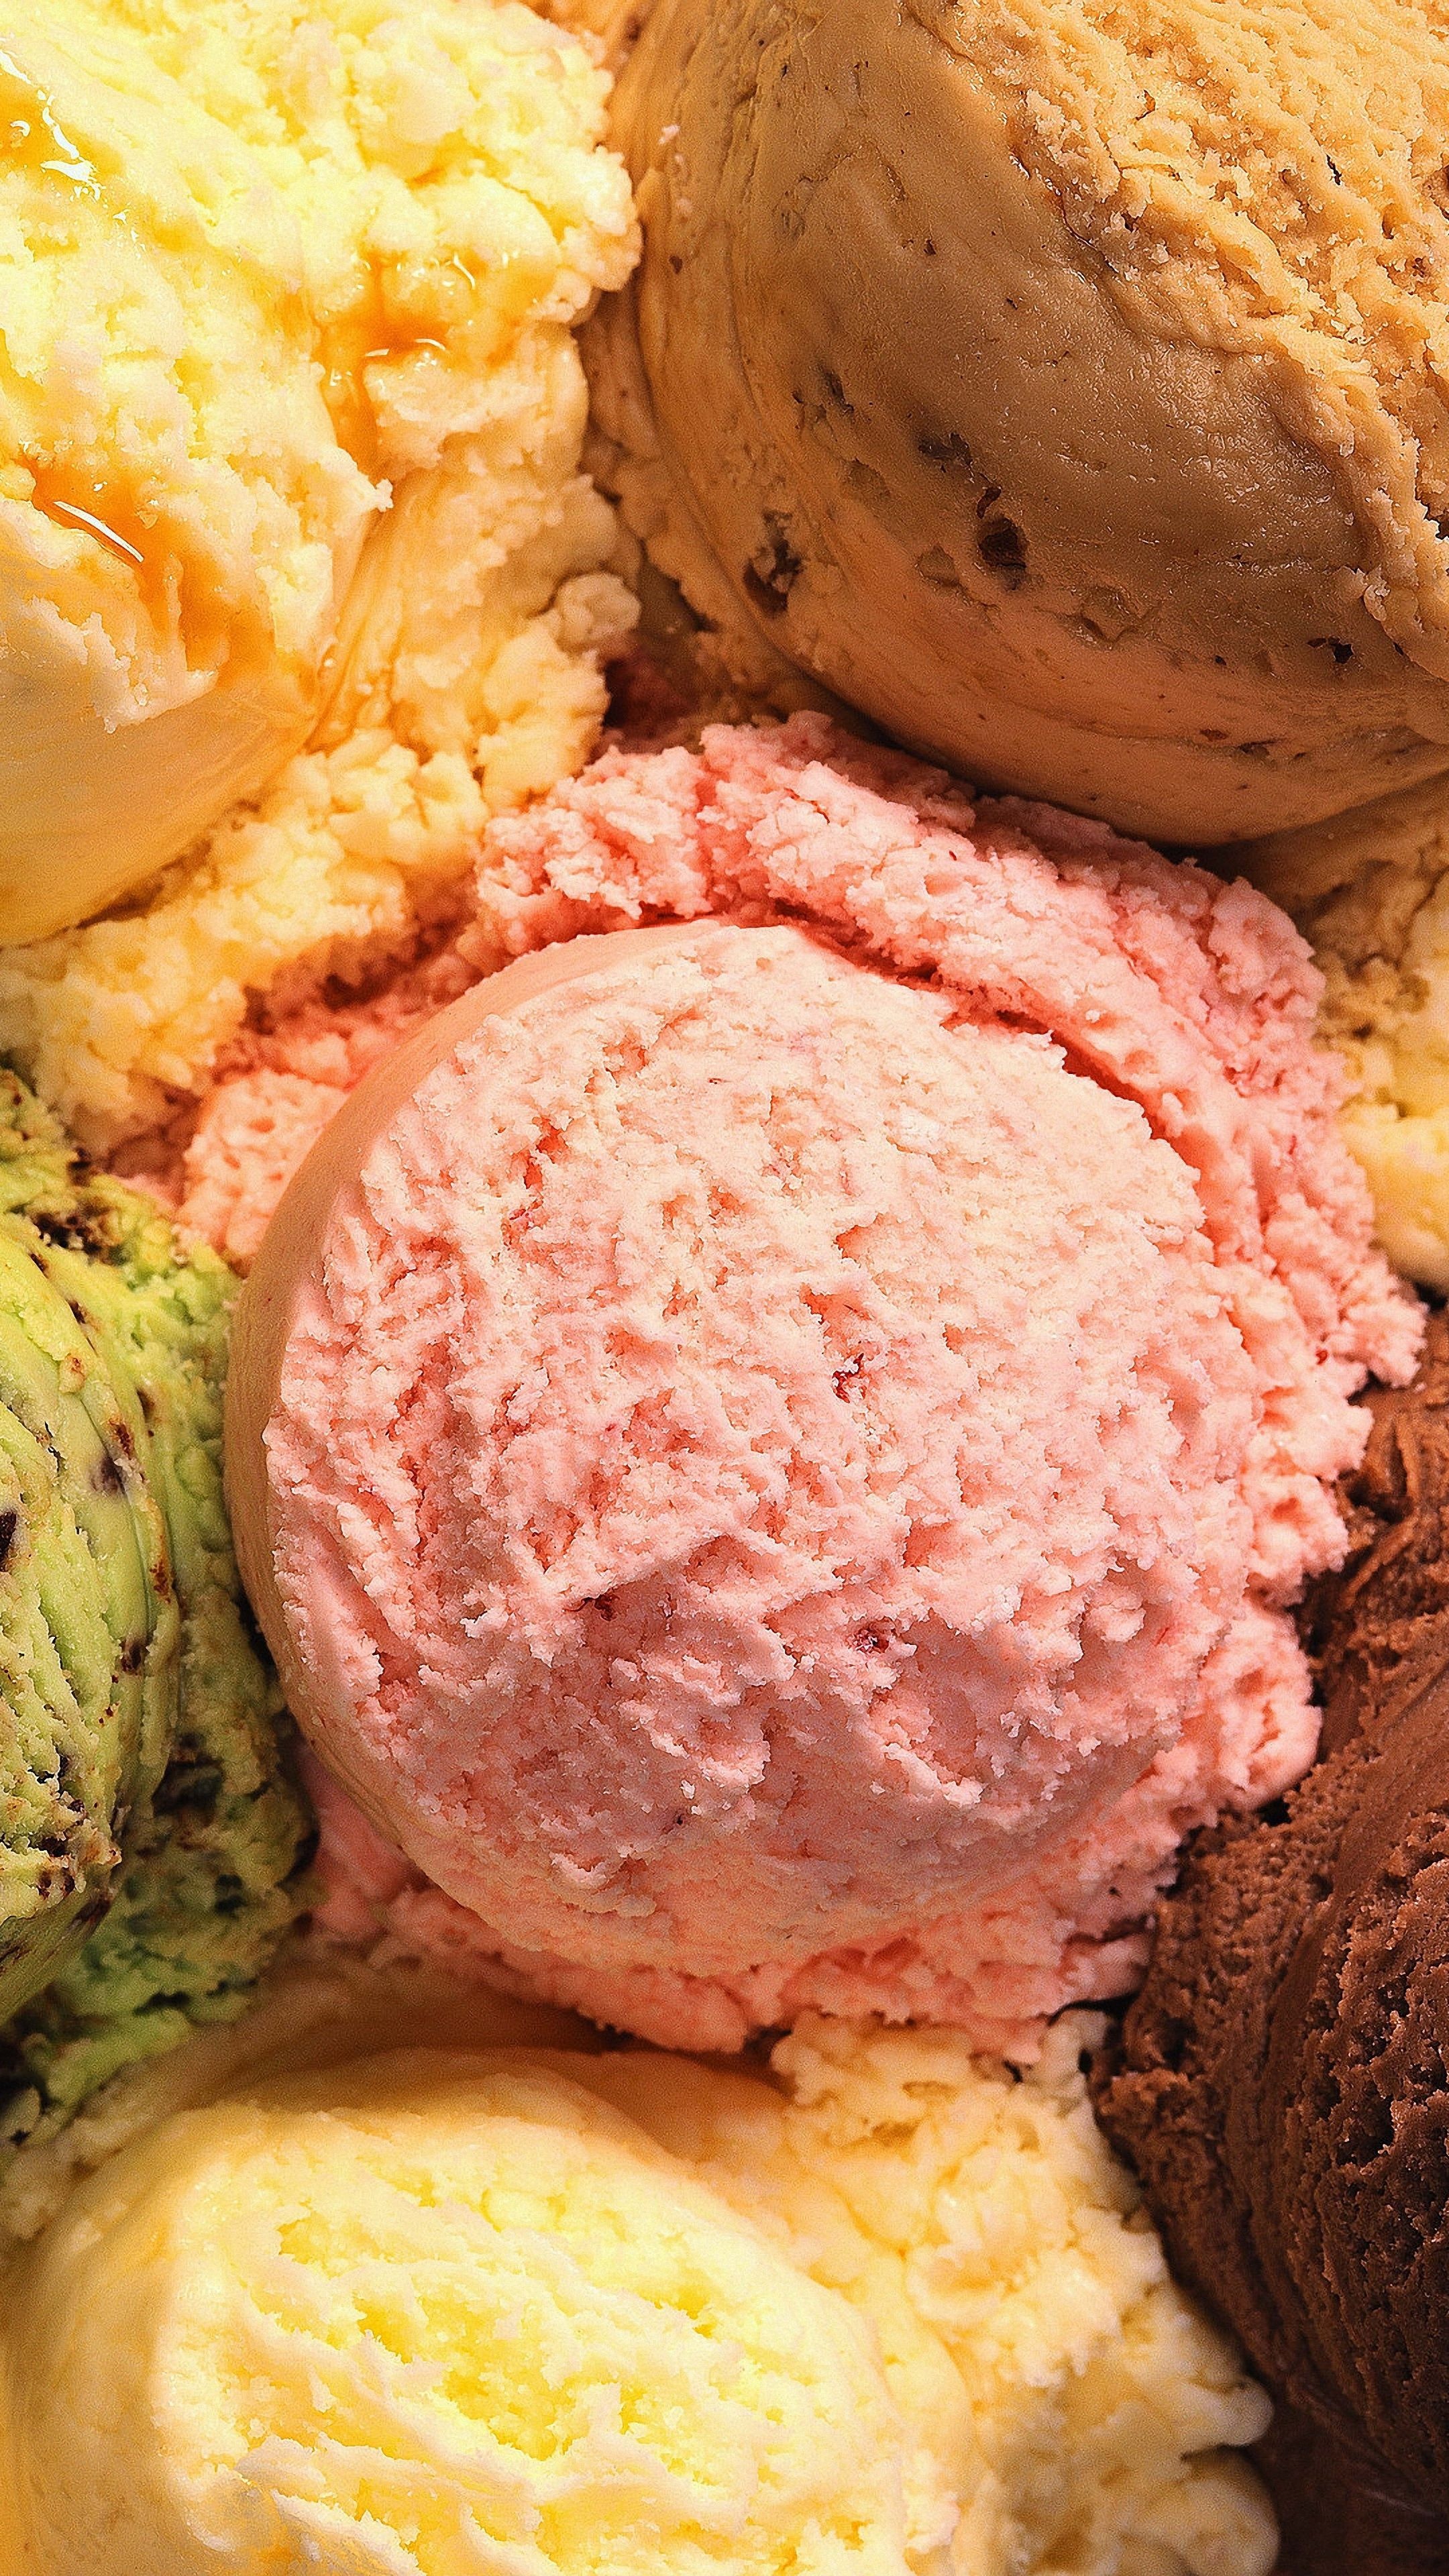 Gelato: Typically contains 35% air and more flavoring than other kinds of frozen desserts. 2160x3840 4K Wallpaper.